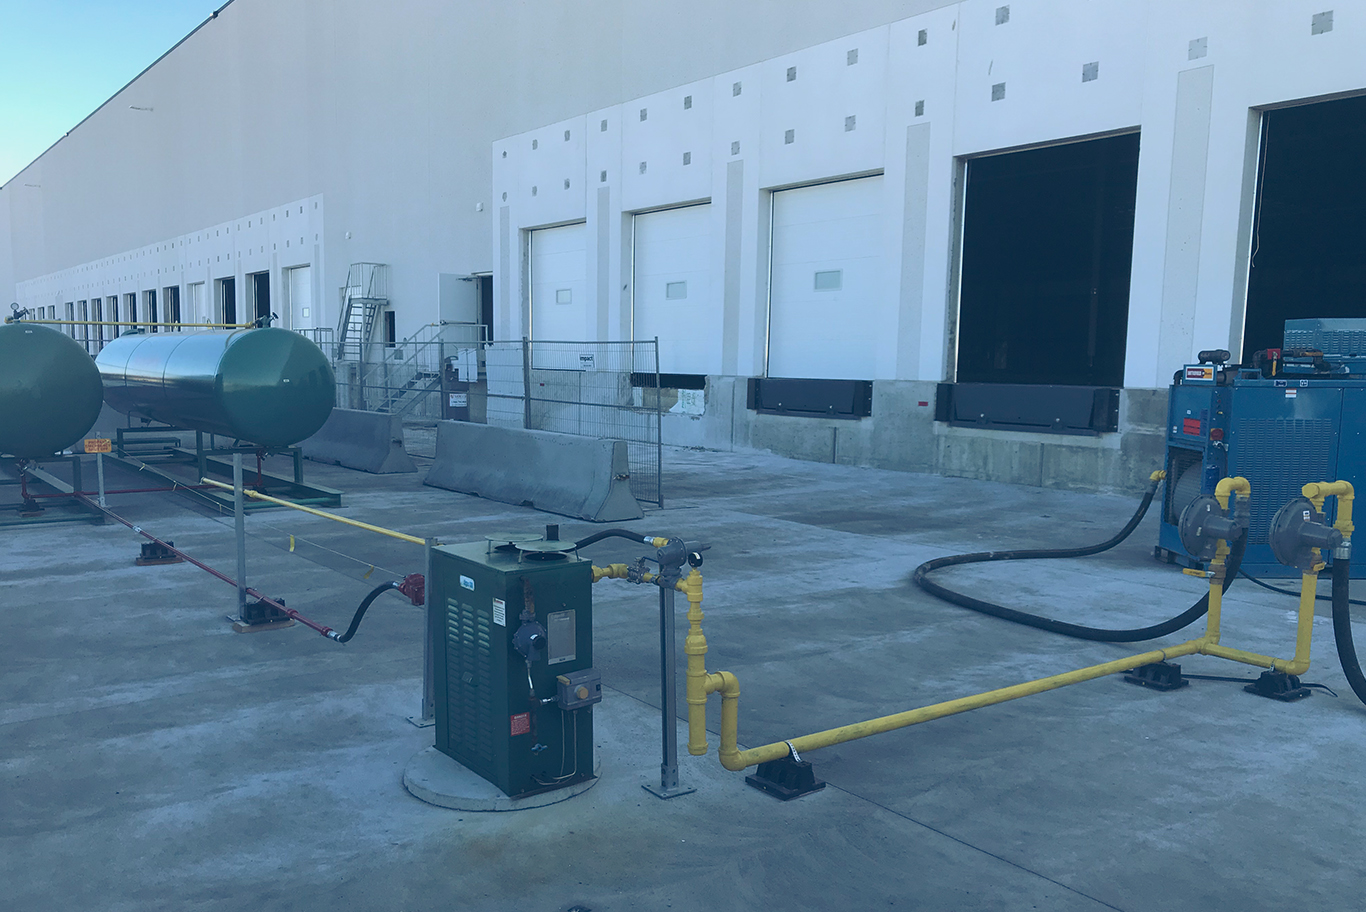 A temporary installation of propane tanks and related equipment at a commercial loading dock